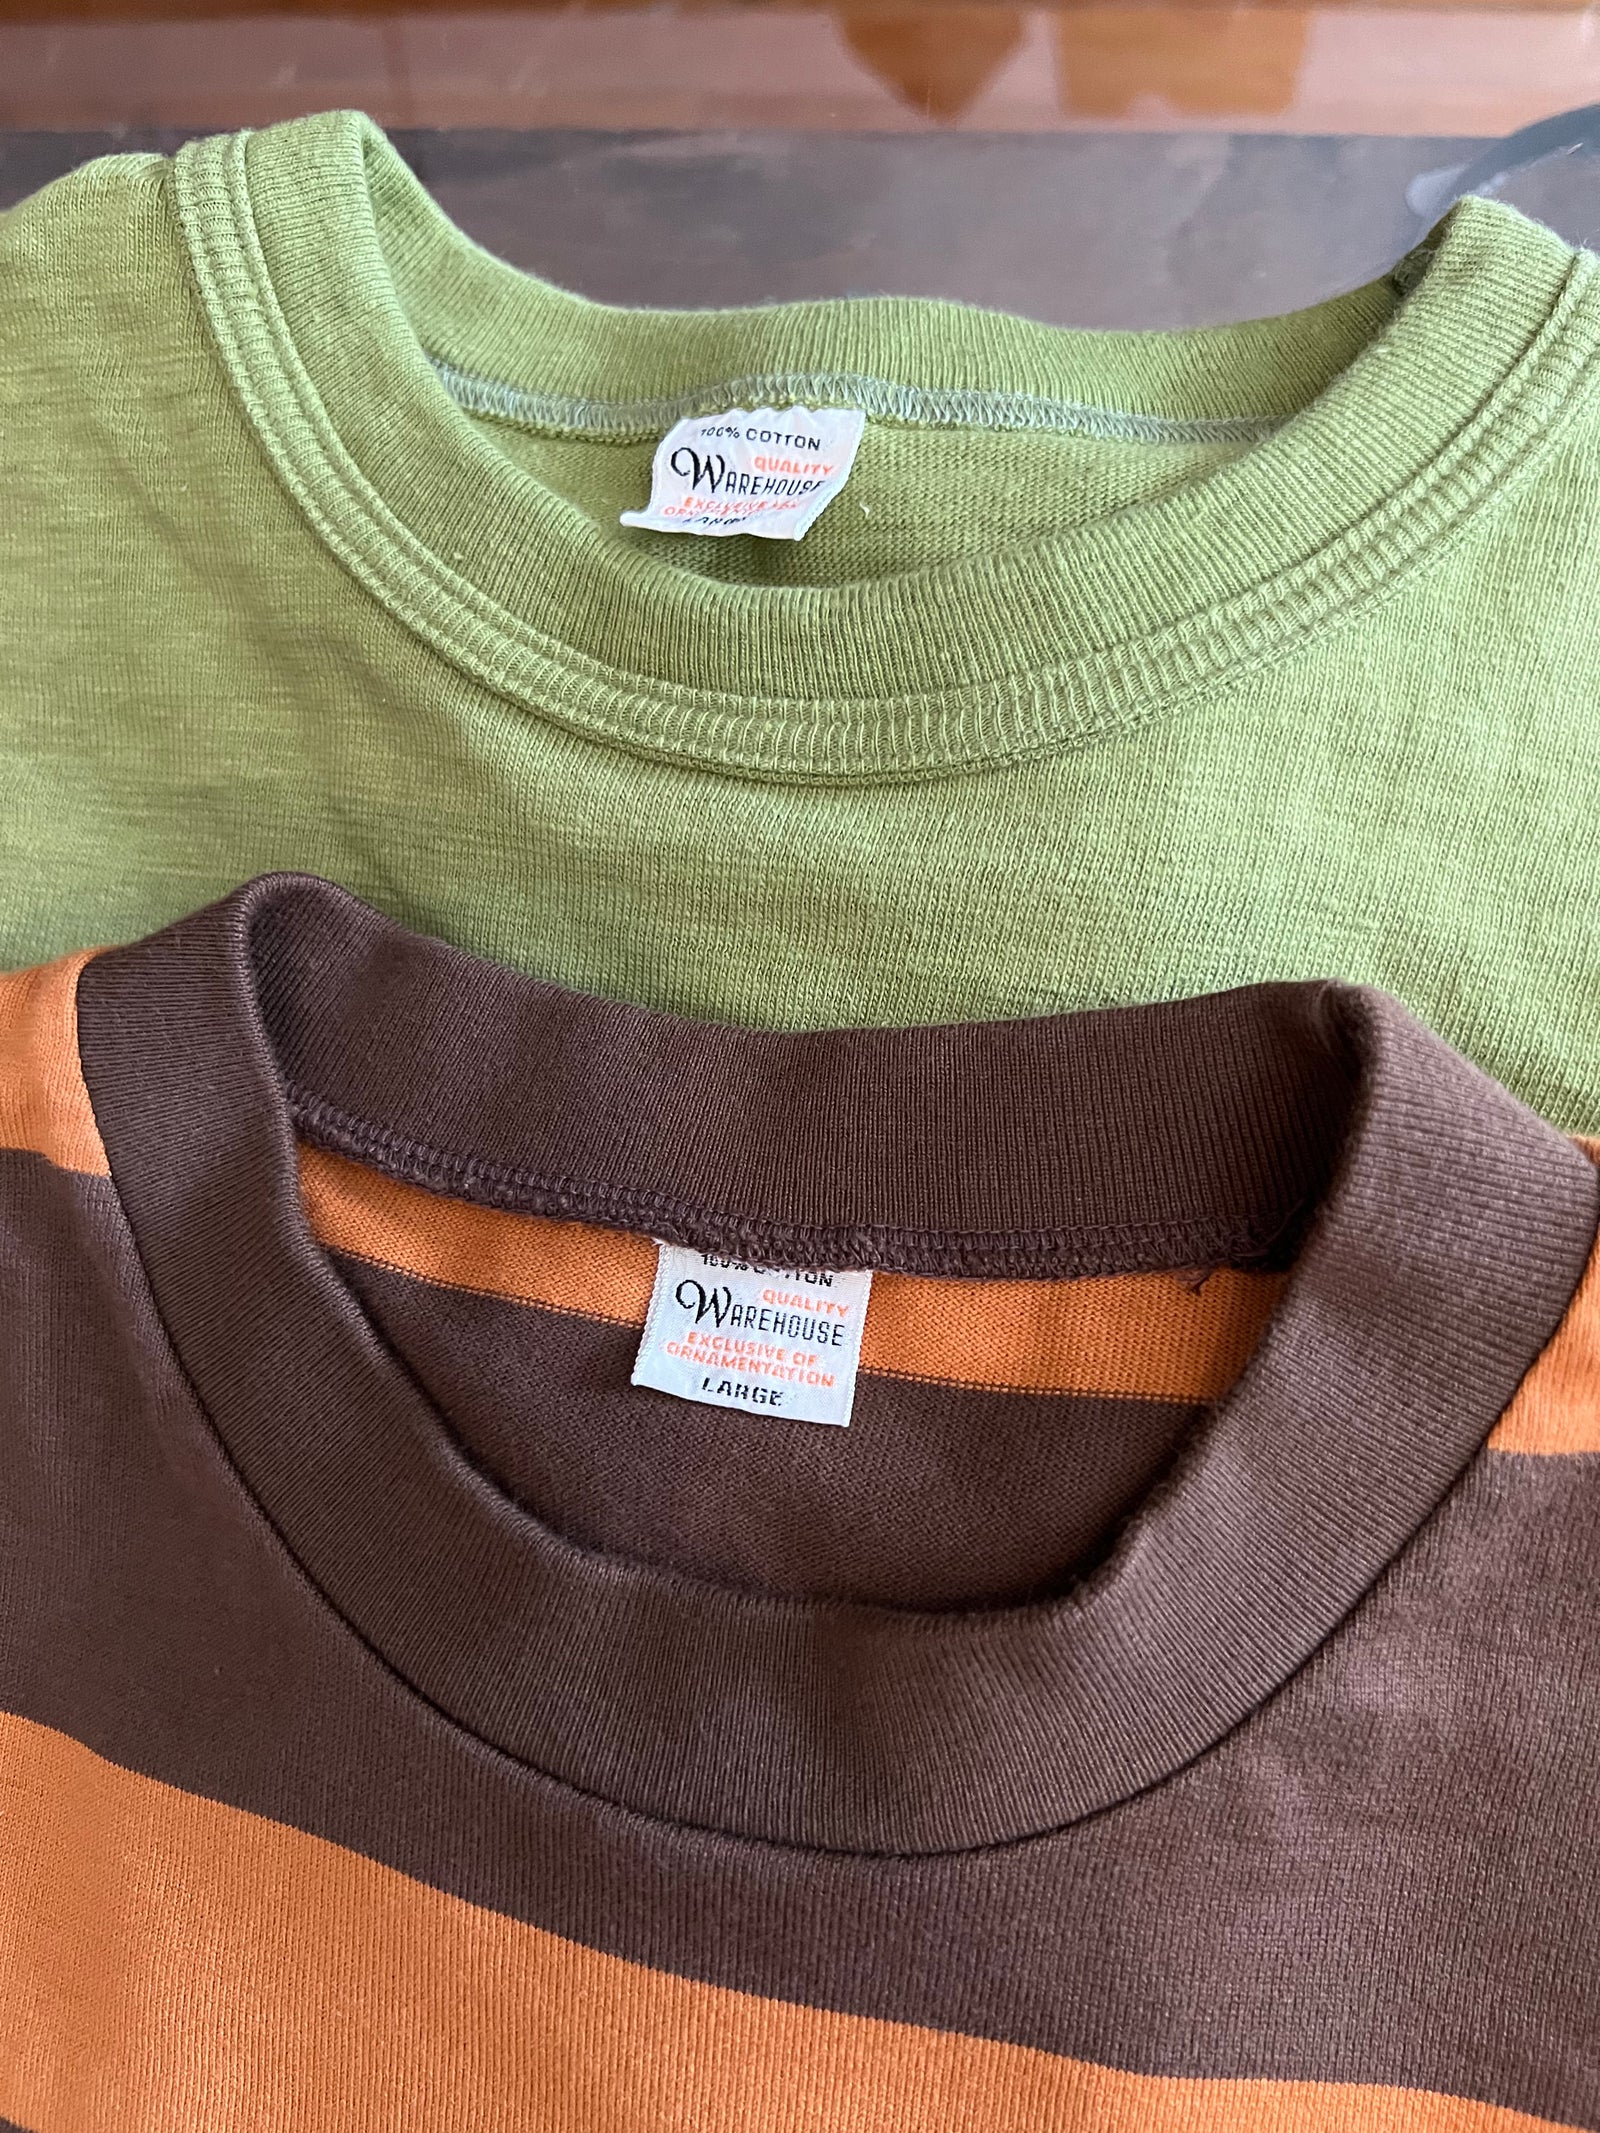 Gently Used Warehouse & Co. 2 Pack - Large - Orange/Brown & Green